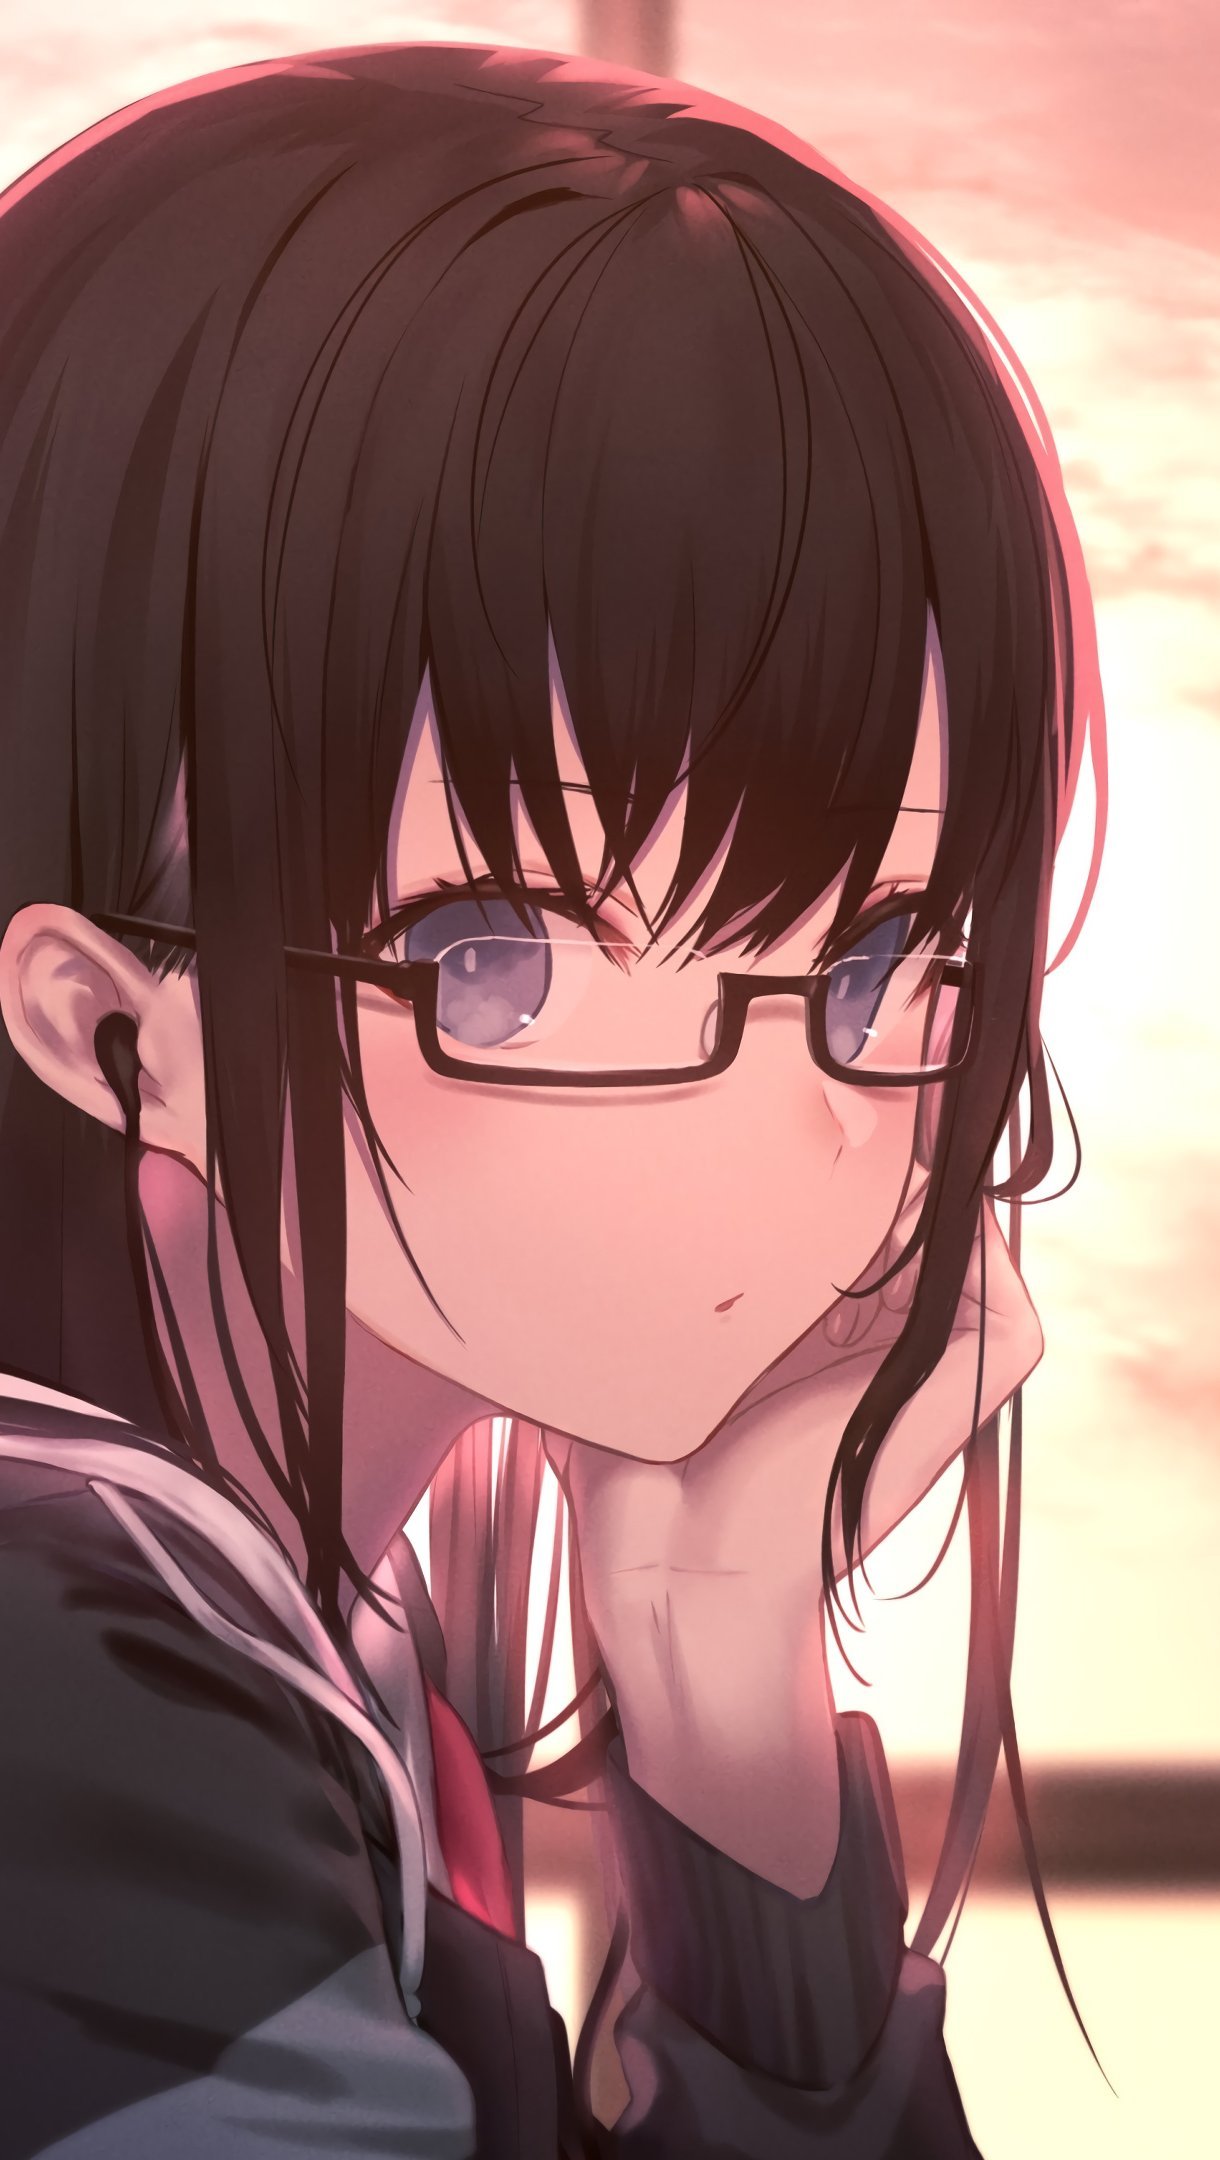 Anime Girl in Glasses with Student Uniform Wallpaper 4k Ultra HD ID:3714